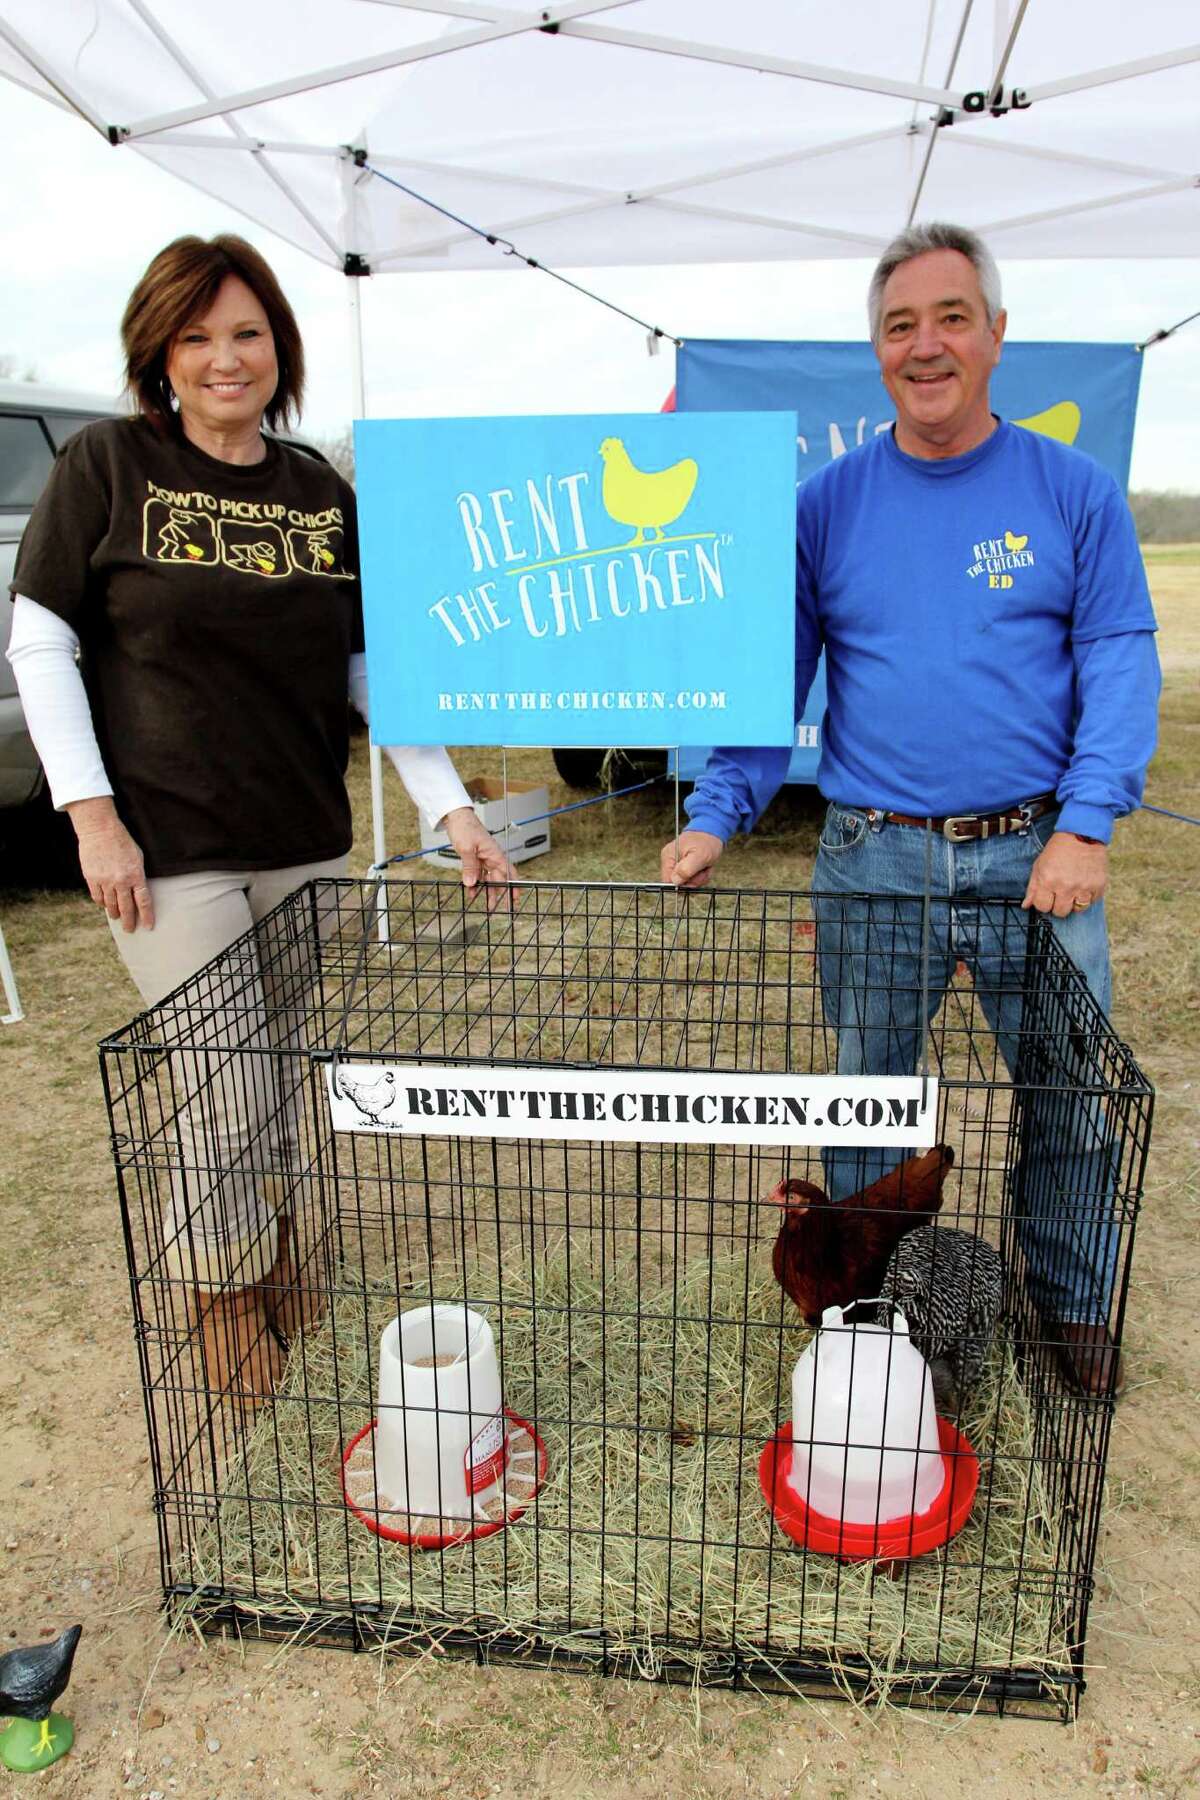 Diane and Ed Roberson learned about the Rent the Chicken franchise last year.